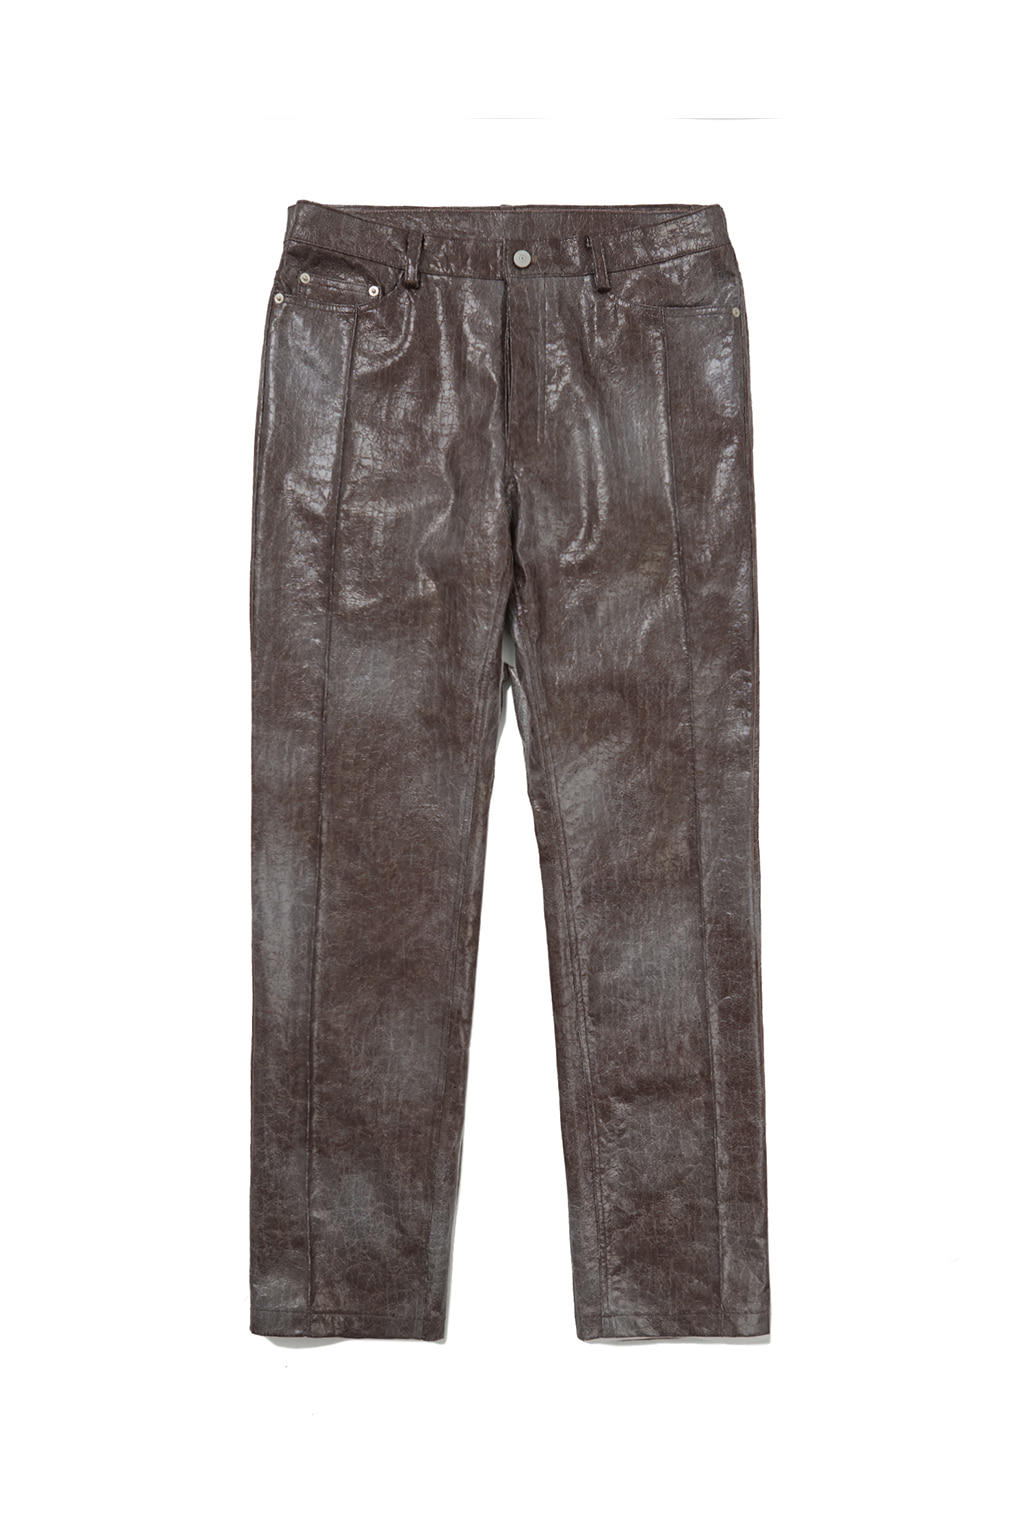 CRACK LEATHER PANTS [BROWN]